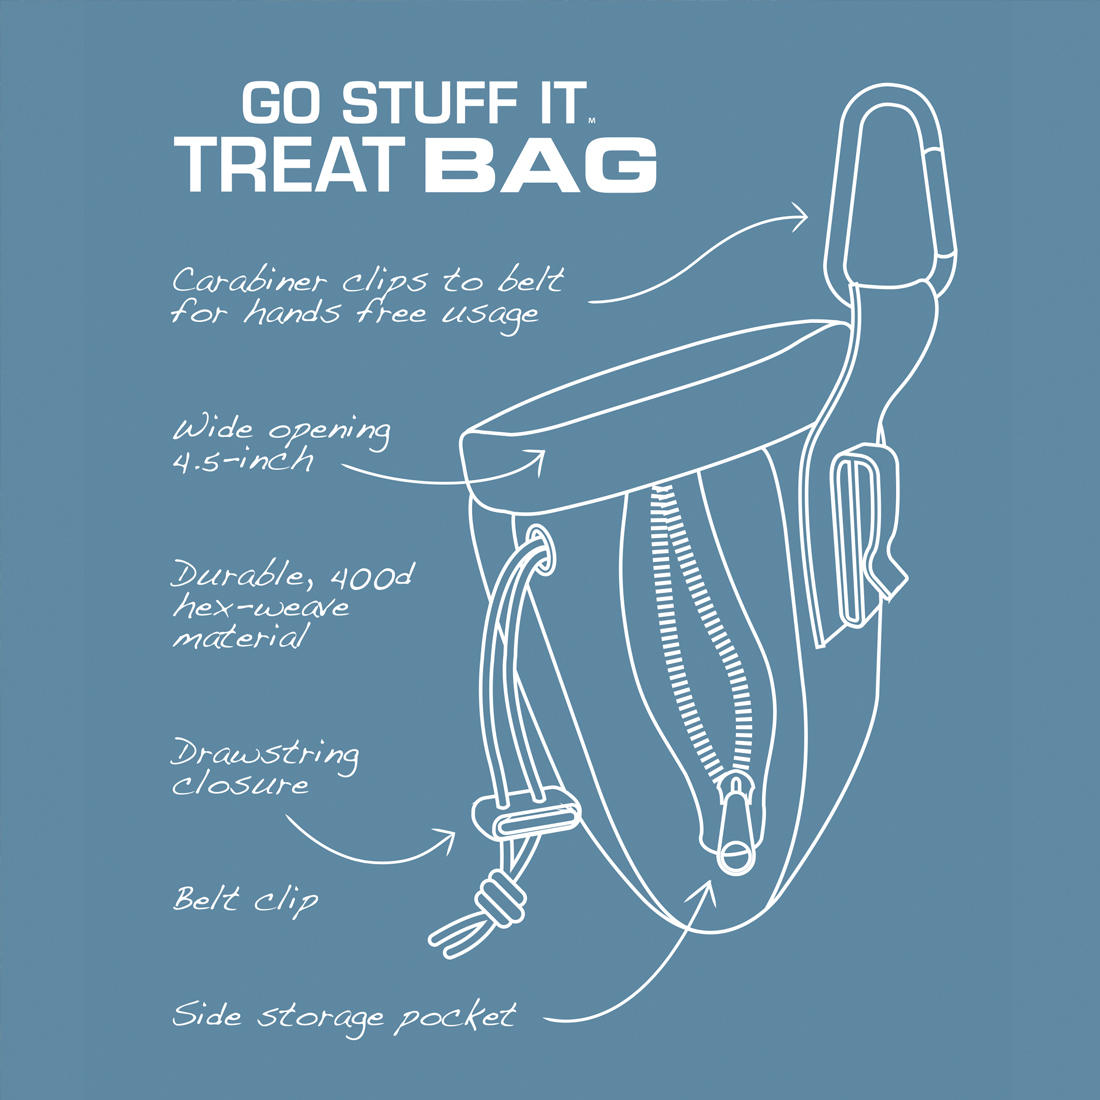 Kurgo Go Stuff It Treat Bag For Dogs Features